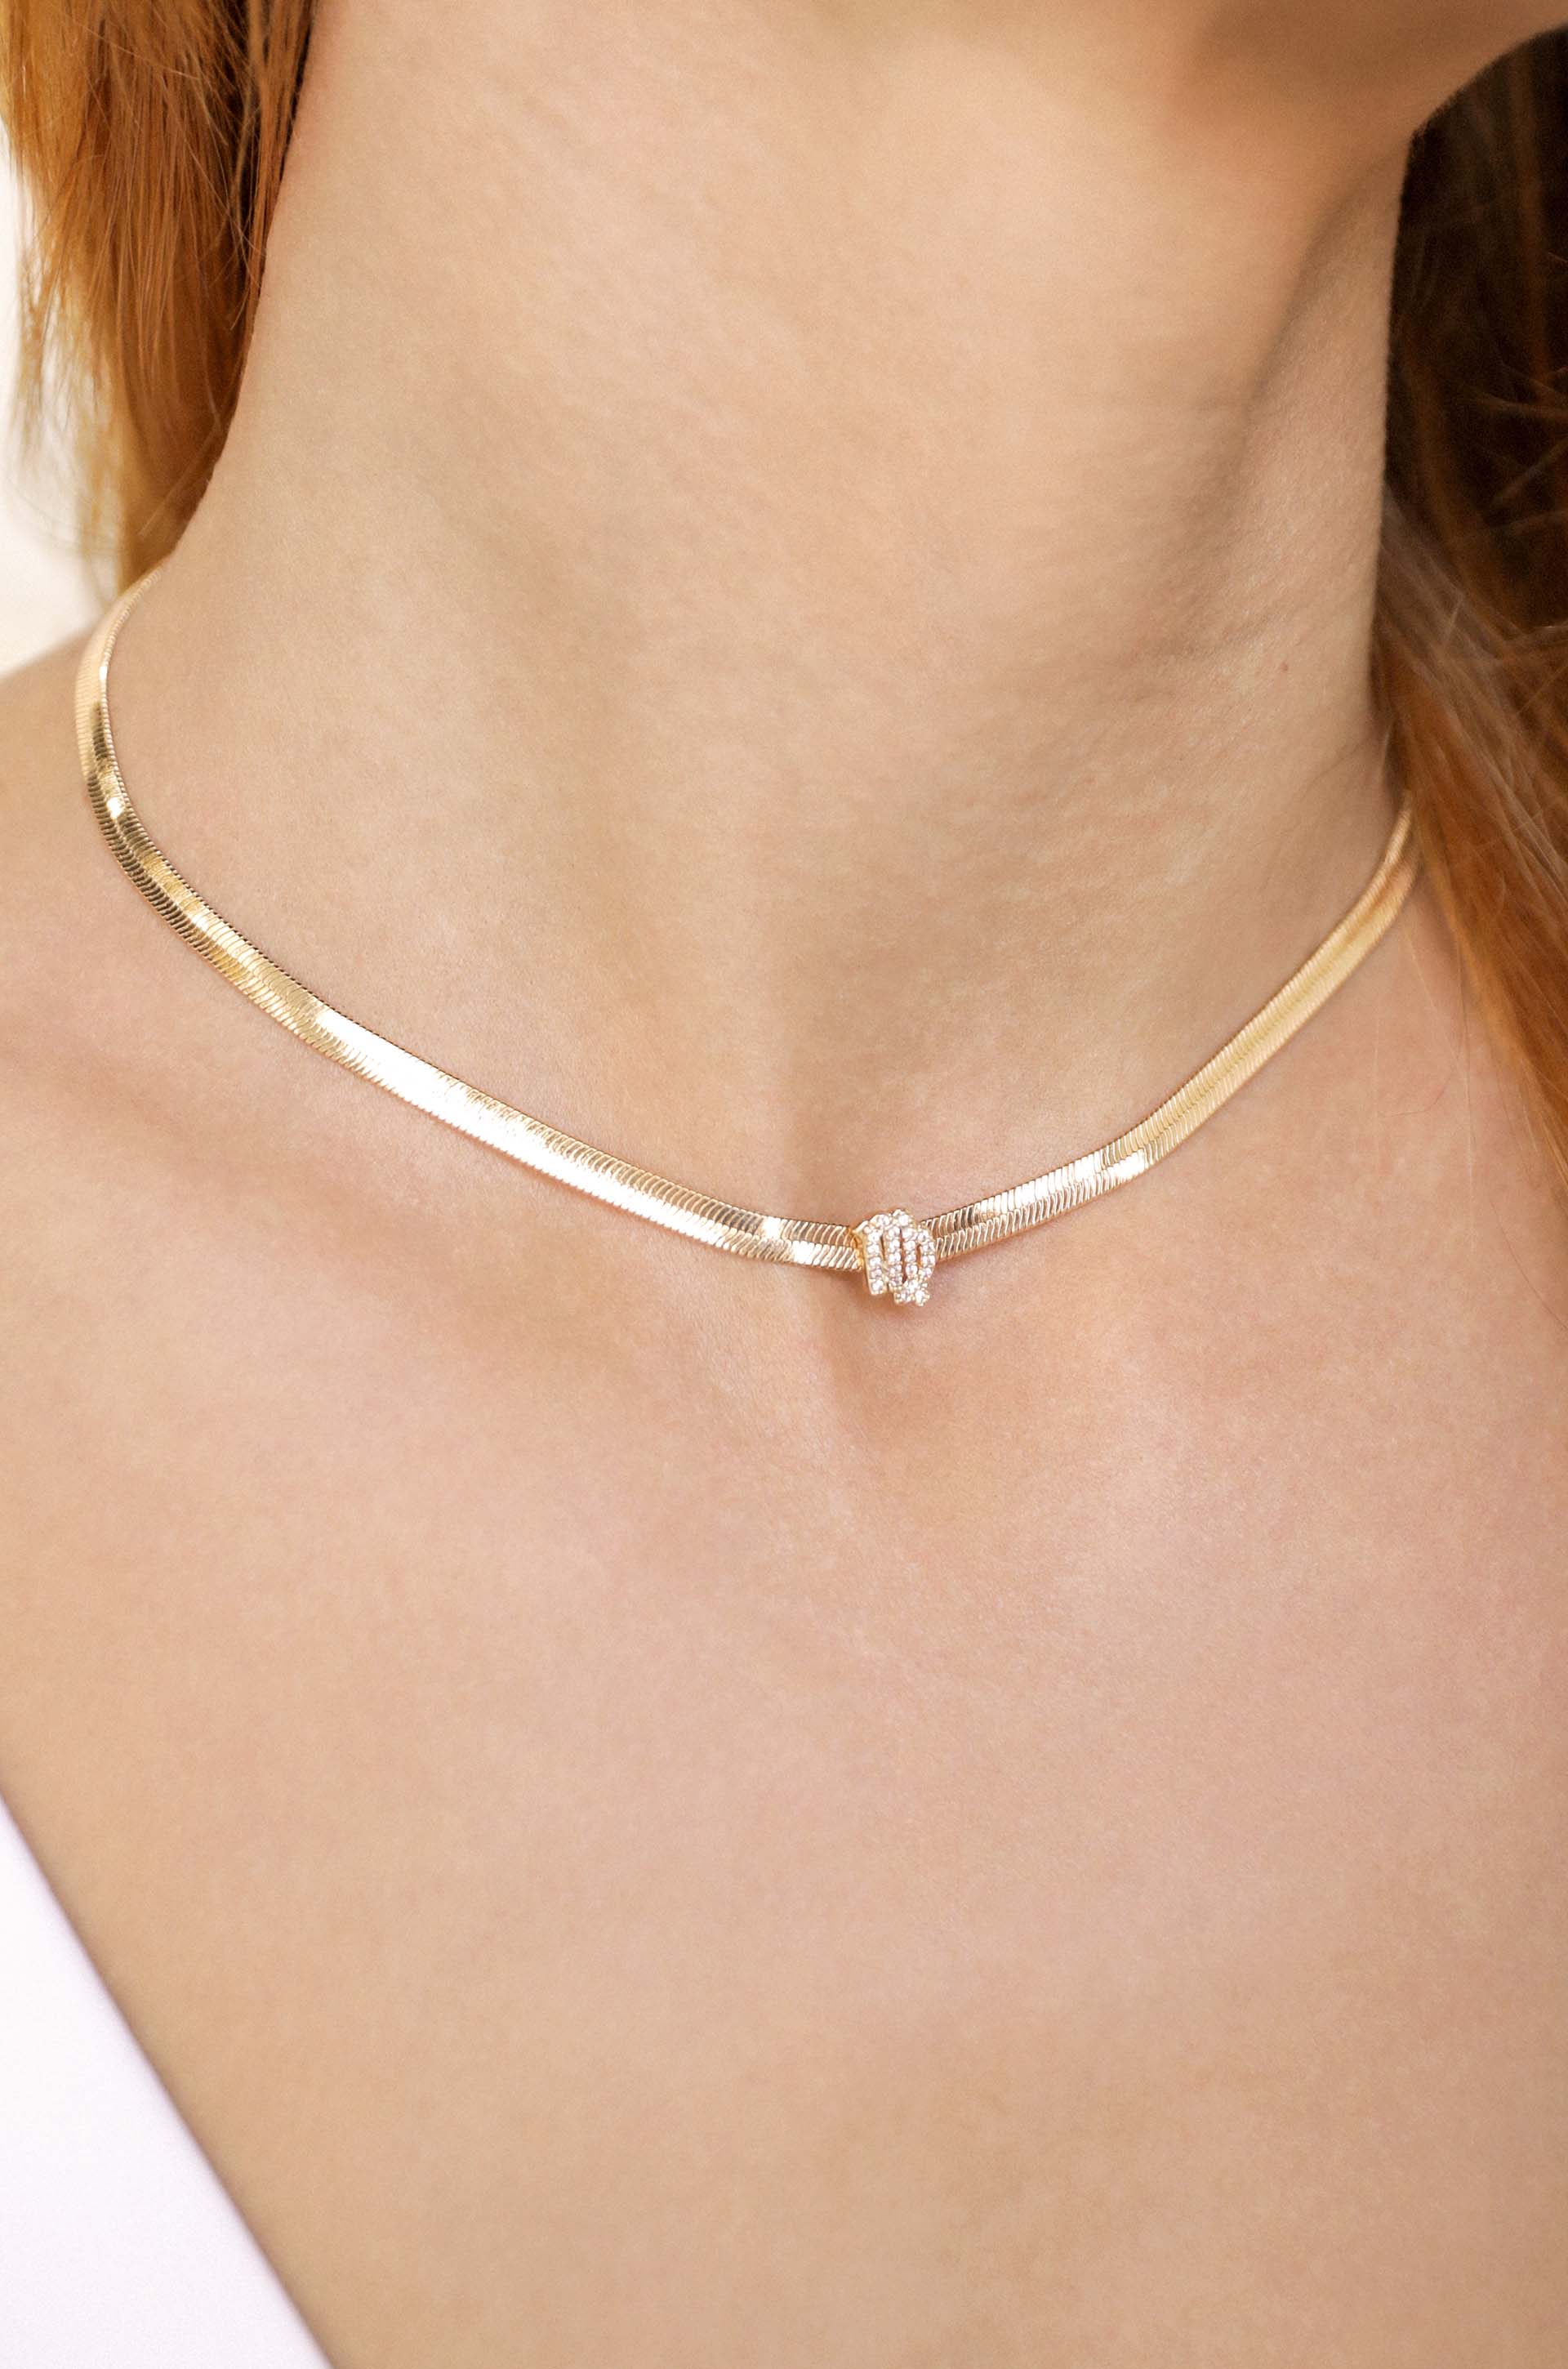 Buy Herringbone Snake Chain Necklace, 925 Sterling Silver Flat Snake Chain,  Everyday Wear Snake Gold Necklace, Wholesale Silver Choker Necklace Online  in India - Etsy